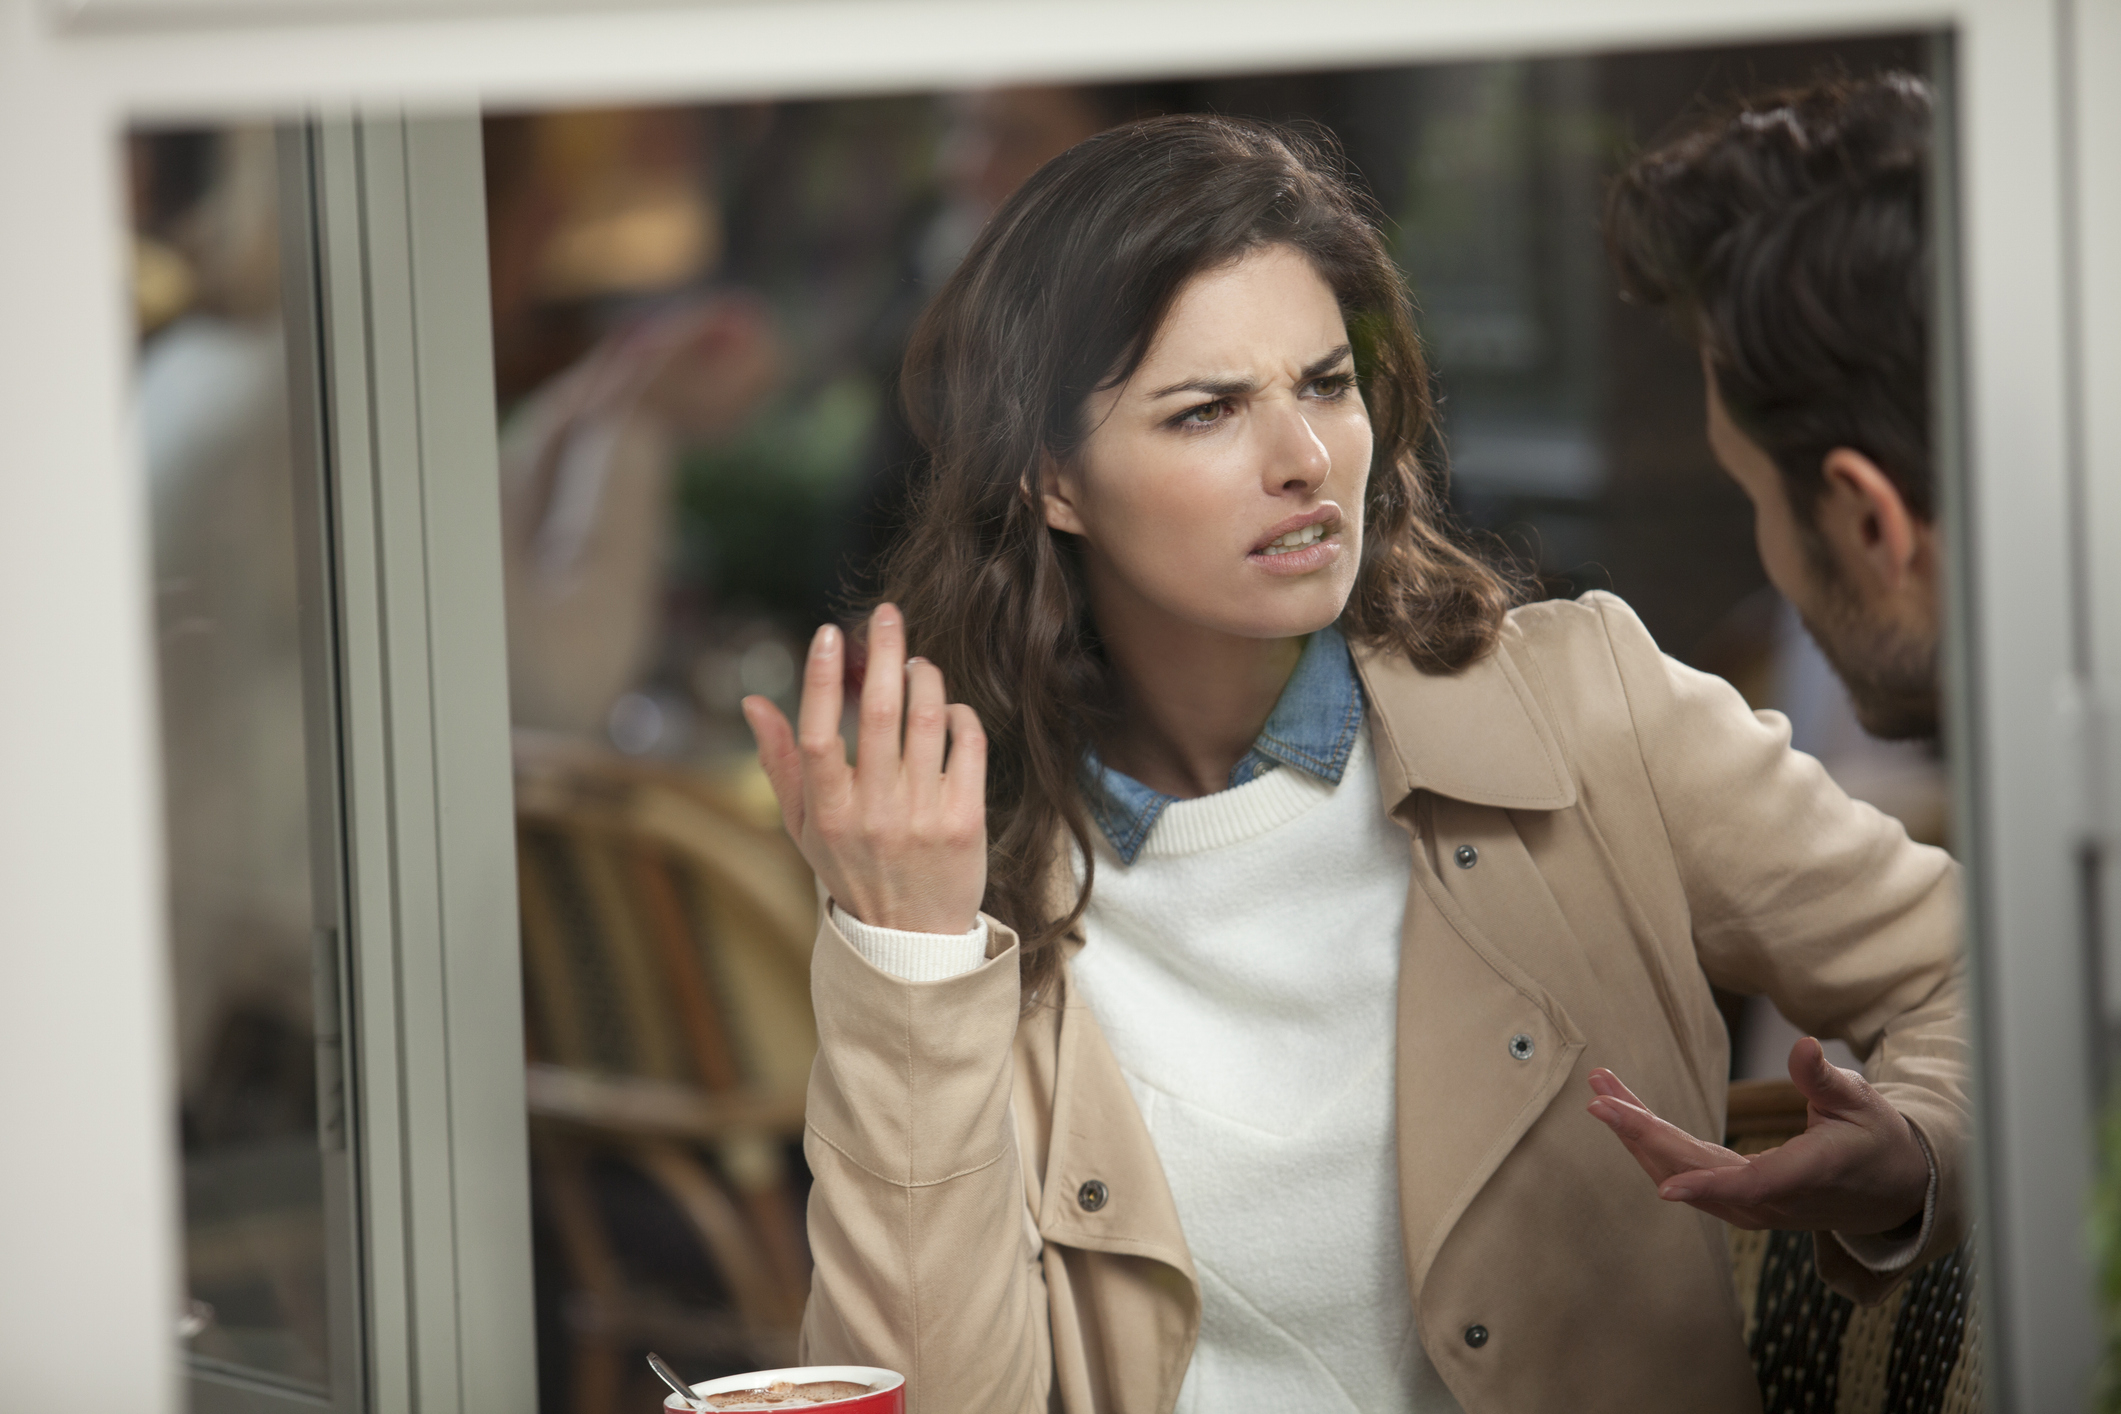 A woman looks annoyed while talking to a man outside a cafe, hand raised in a questioning gesture